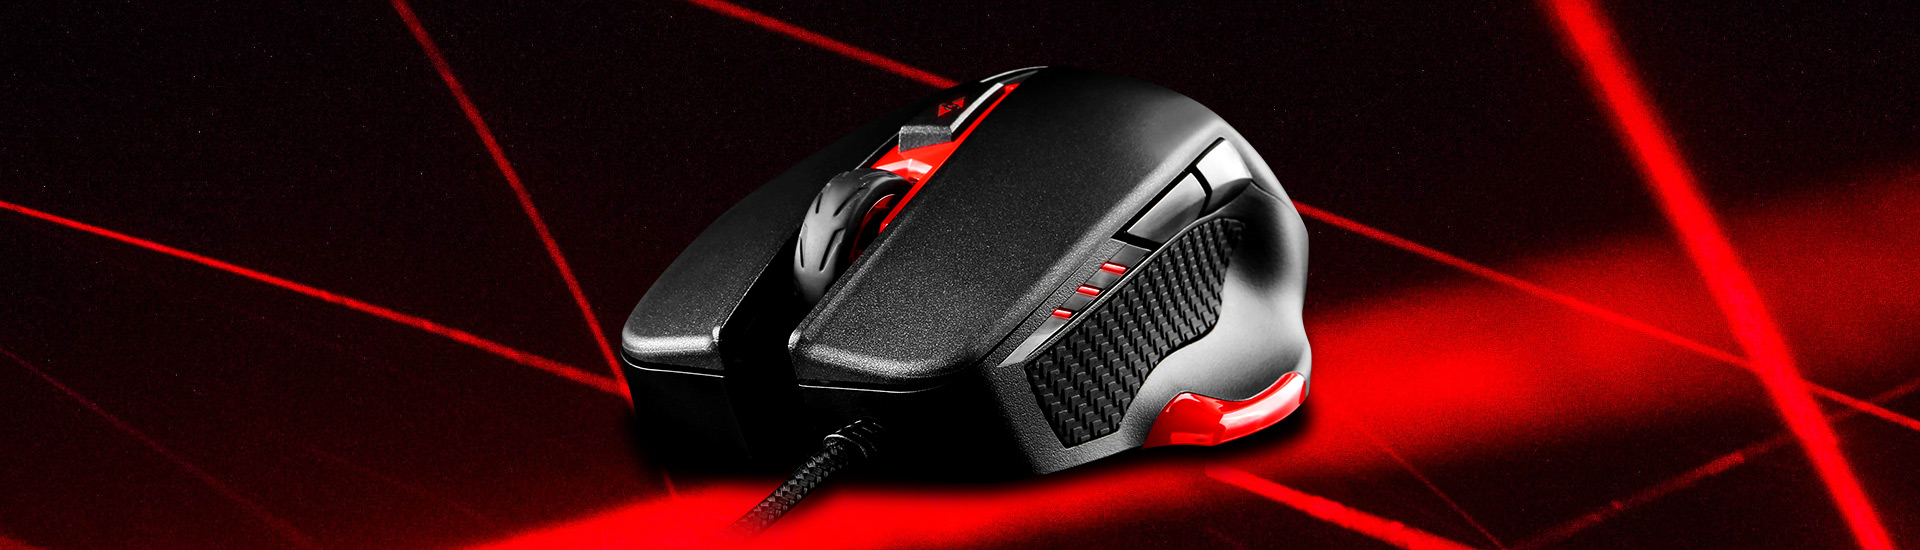 MSI INTRODUCE INTERCEPTOR DS300 GAMING MOUSE